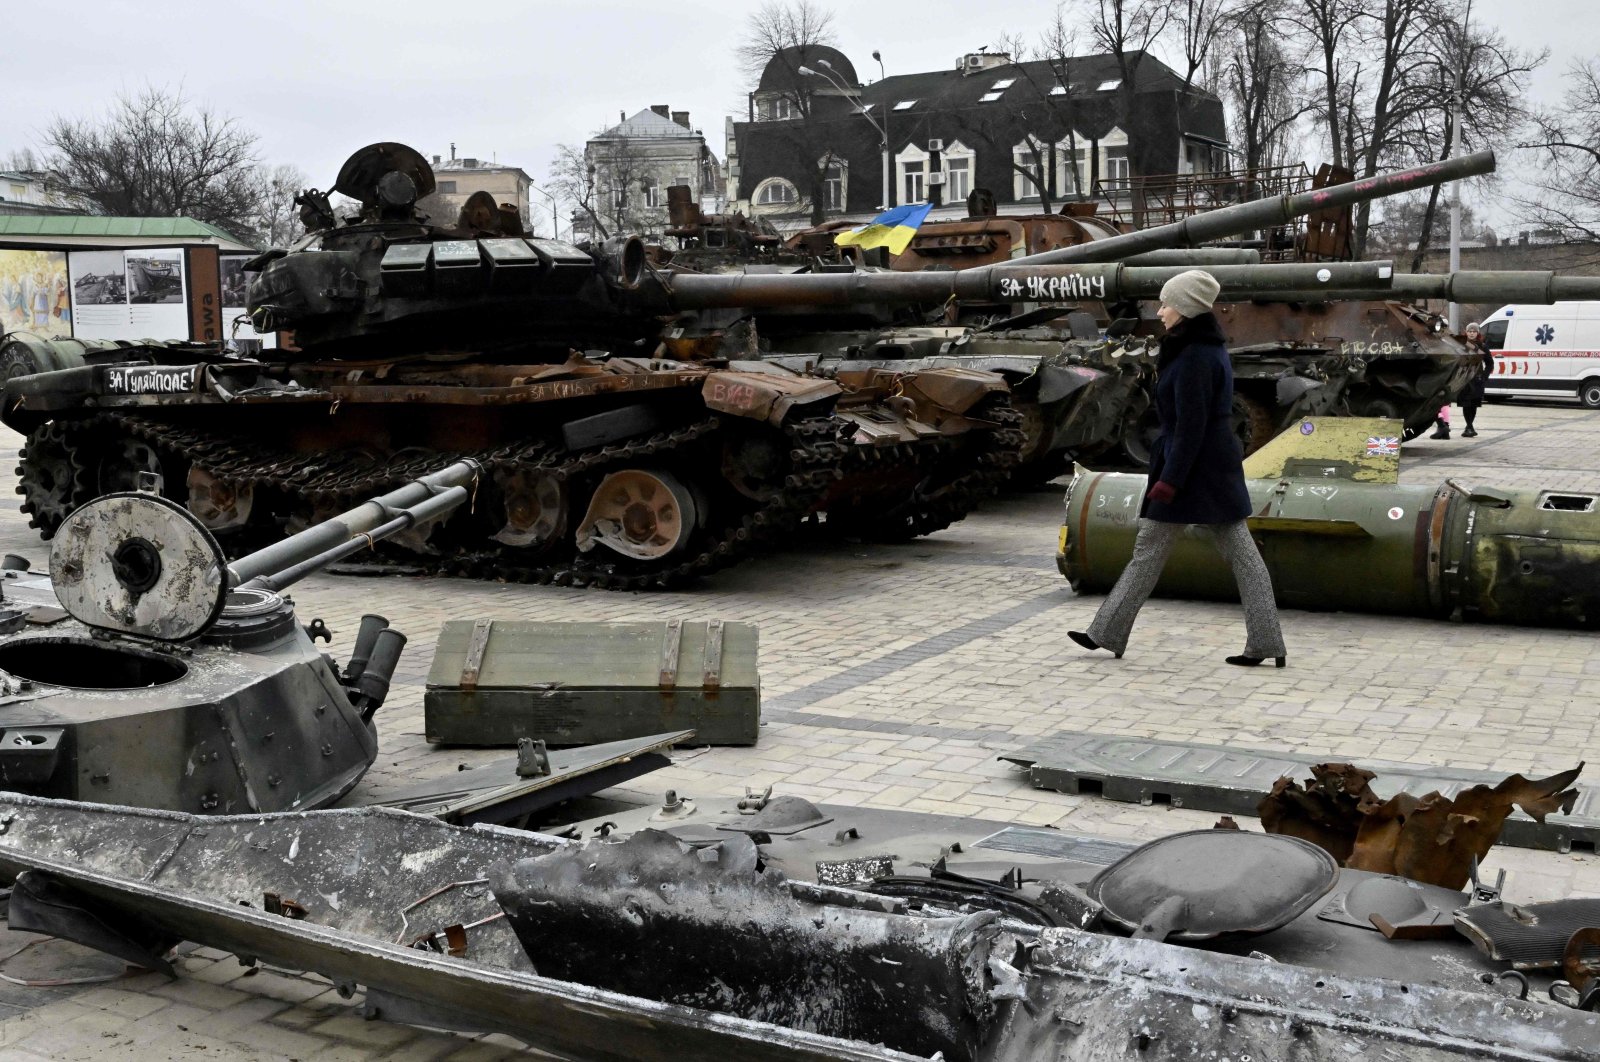 A woman walks past destroyed Russian military vehicles shown in an open-air exhibition in the center of Kyiv, Ukraine, Feb. 24, 2023. (AFP Photo)